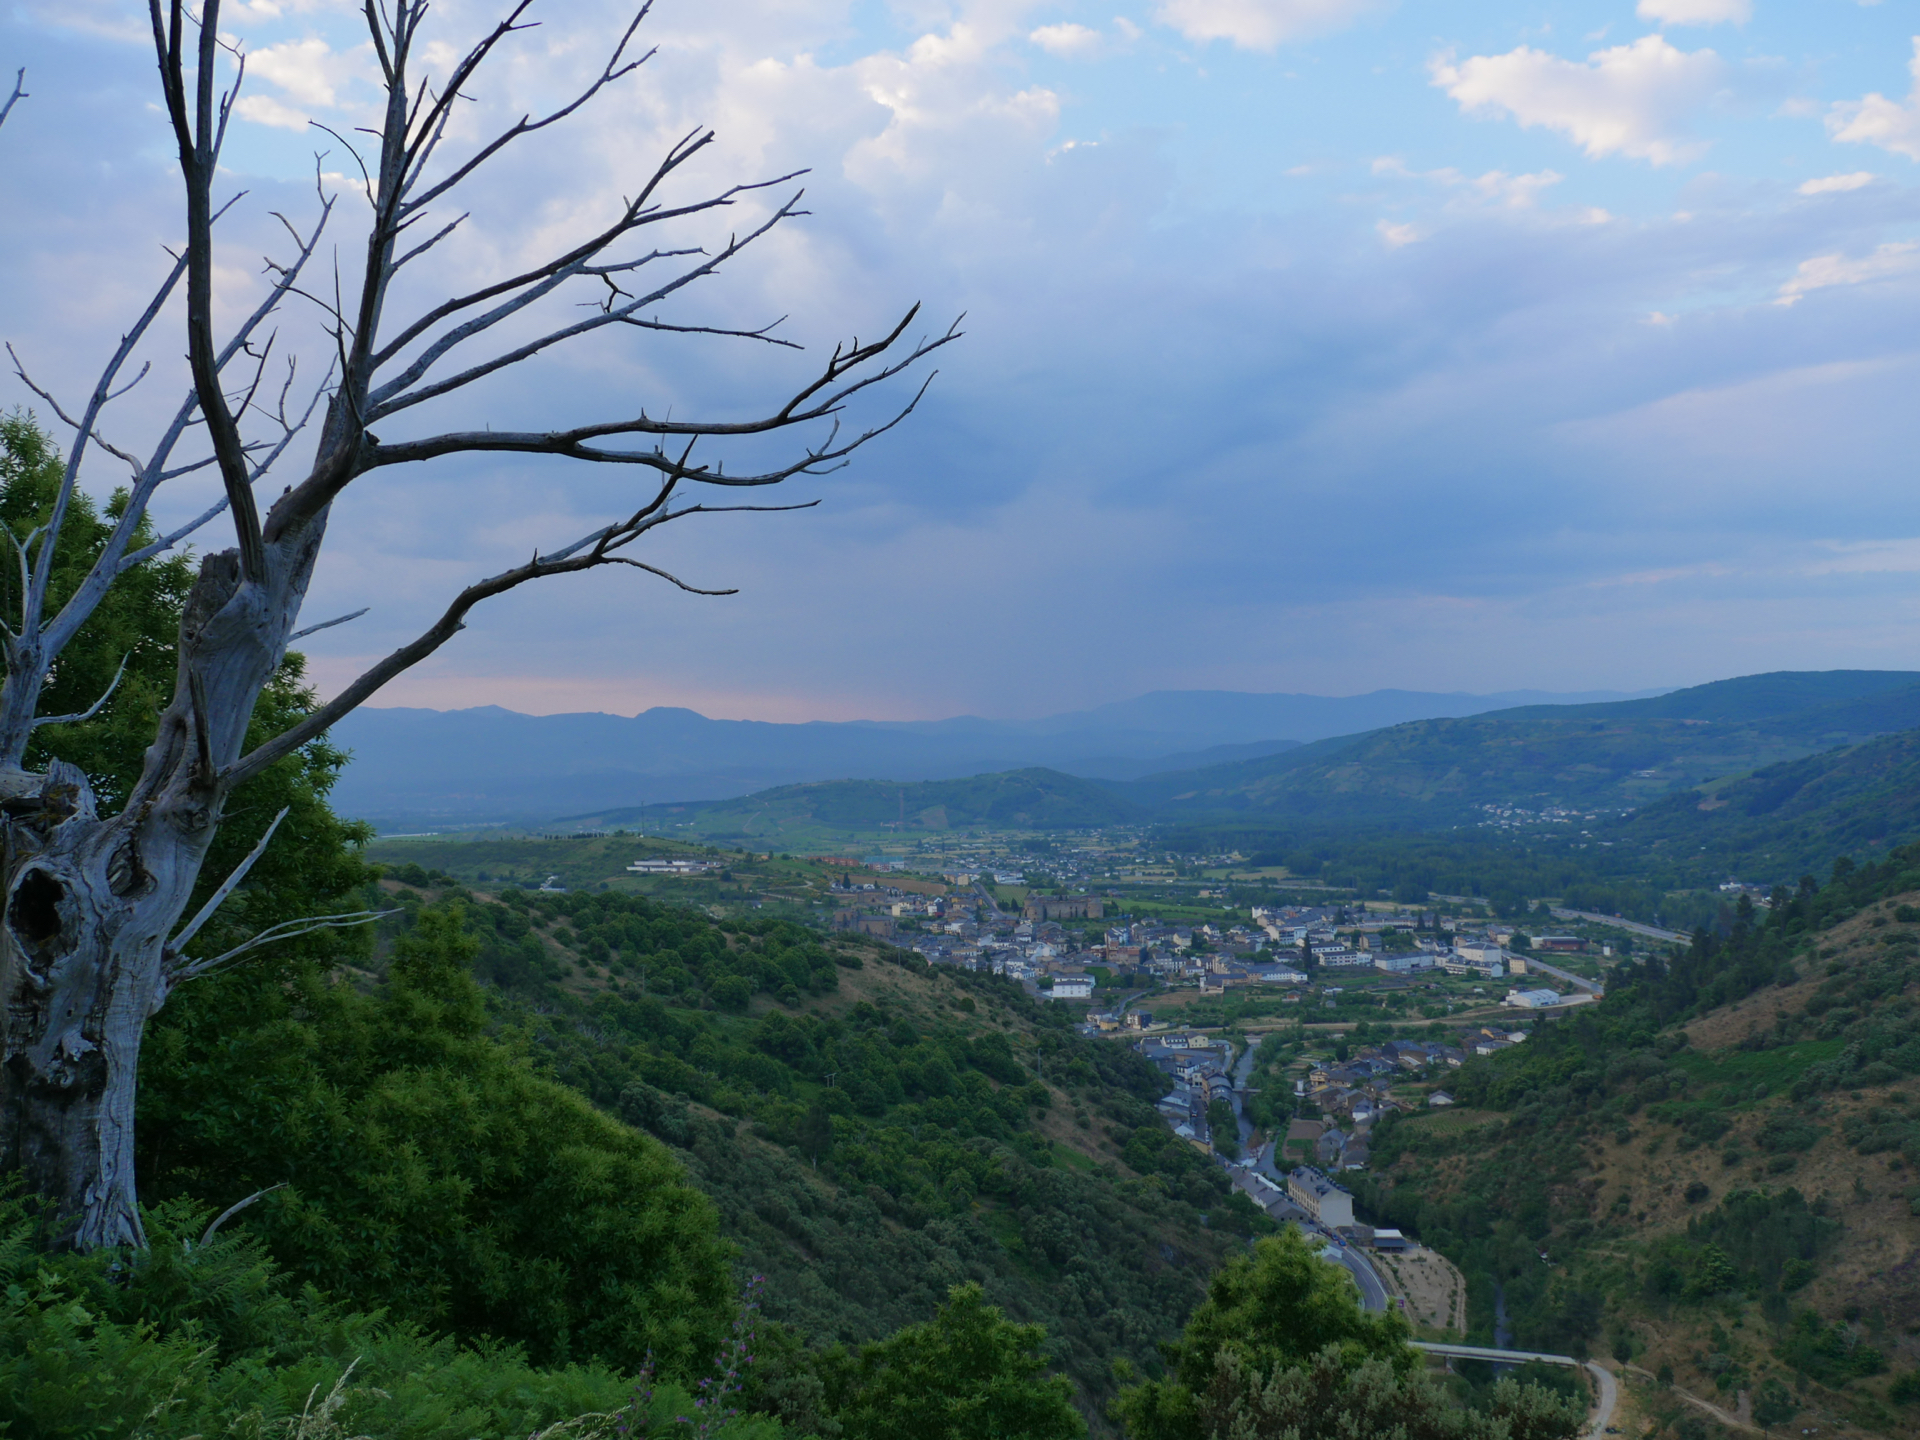 The Camino Duro gives hikers a spectacular view of the Ponferrada valley.